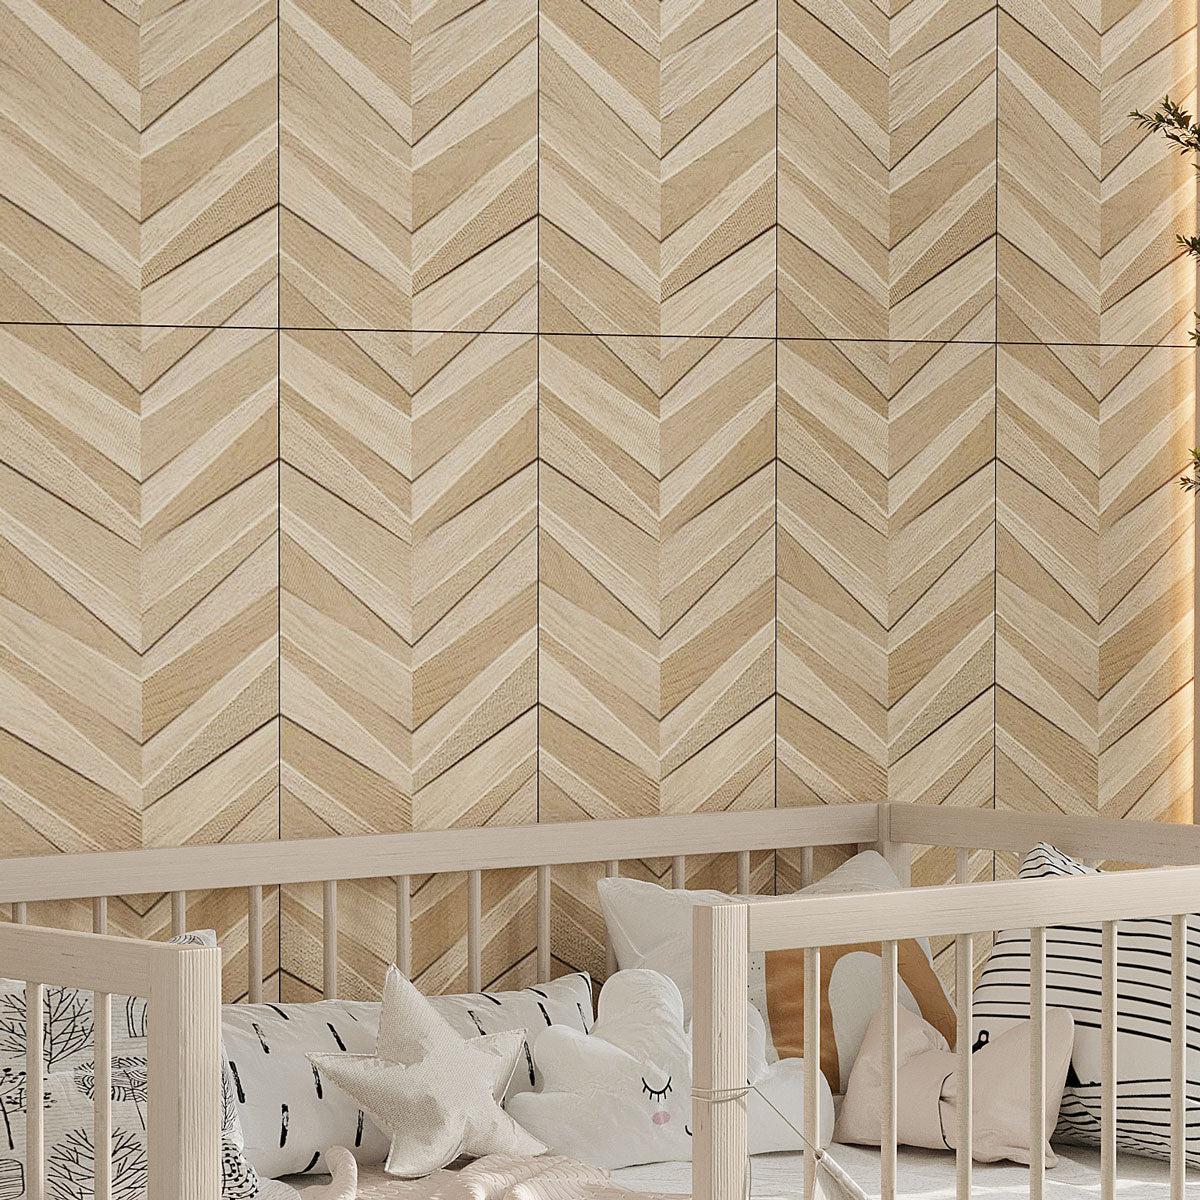 Japandi Textured Chevron Light Wood accent wall with porcelain tile